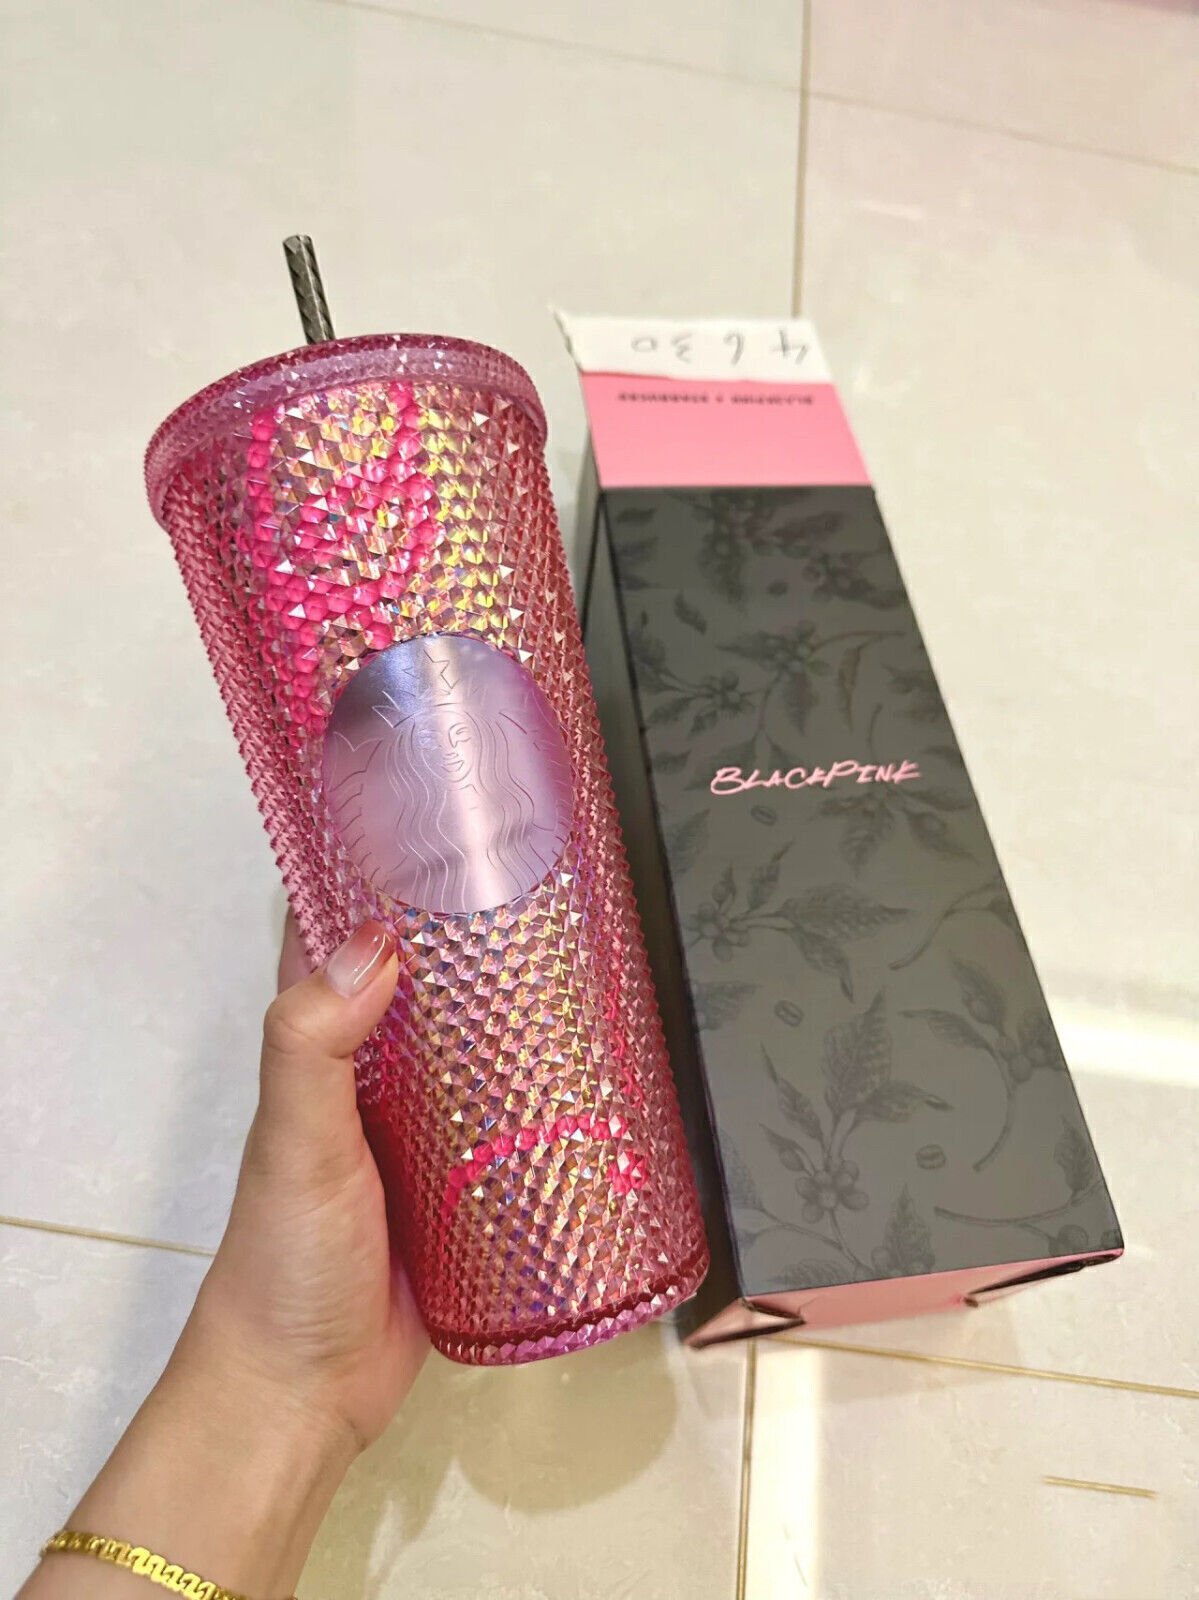 X Blackpink Group Starbucks Cooperation Durian cup Pink&Black Cup Tumbler 24oz